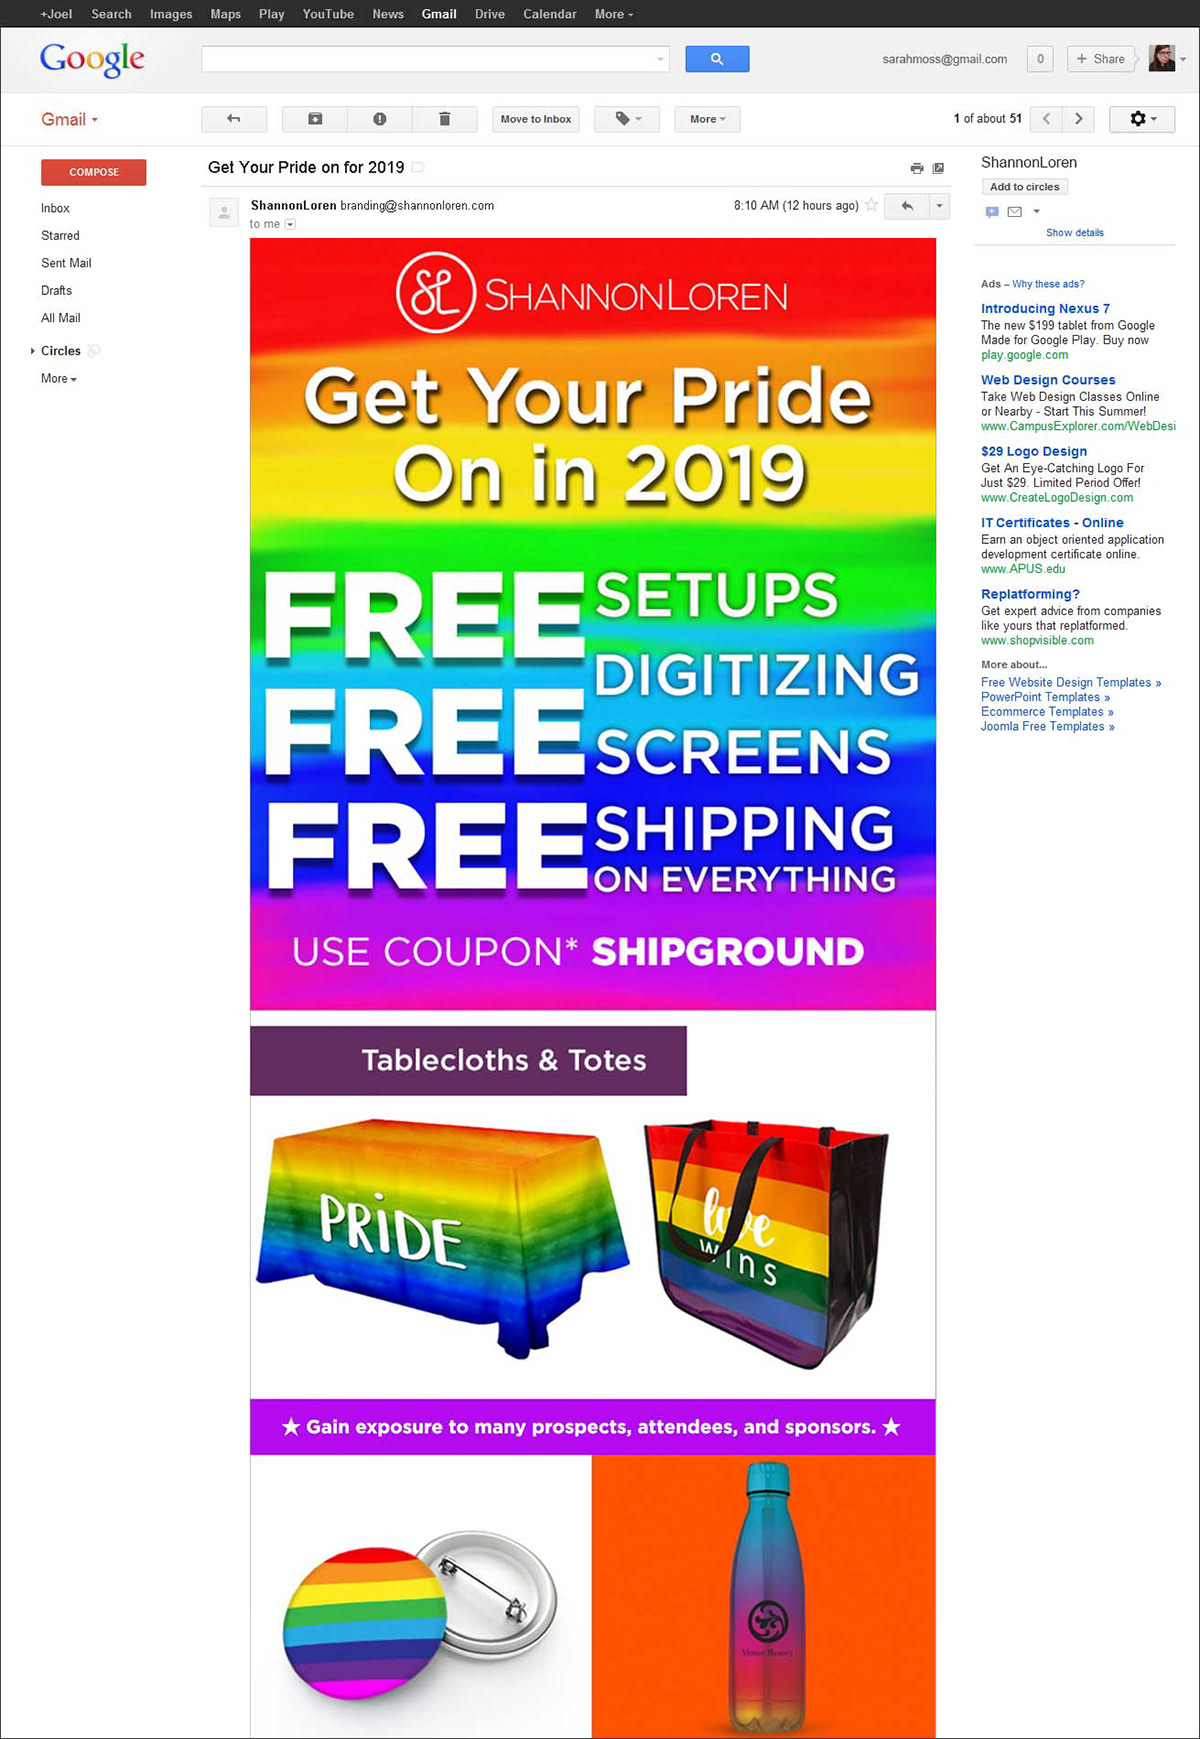 Email Email campaign email marketing LGBT lgbt pride pride promo promo products Promotional Marketing